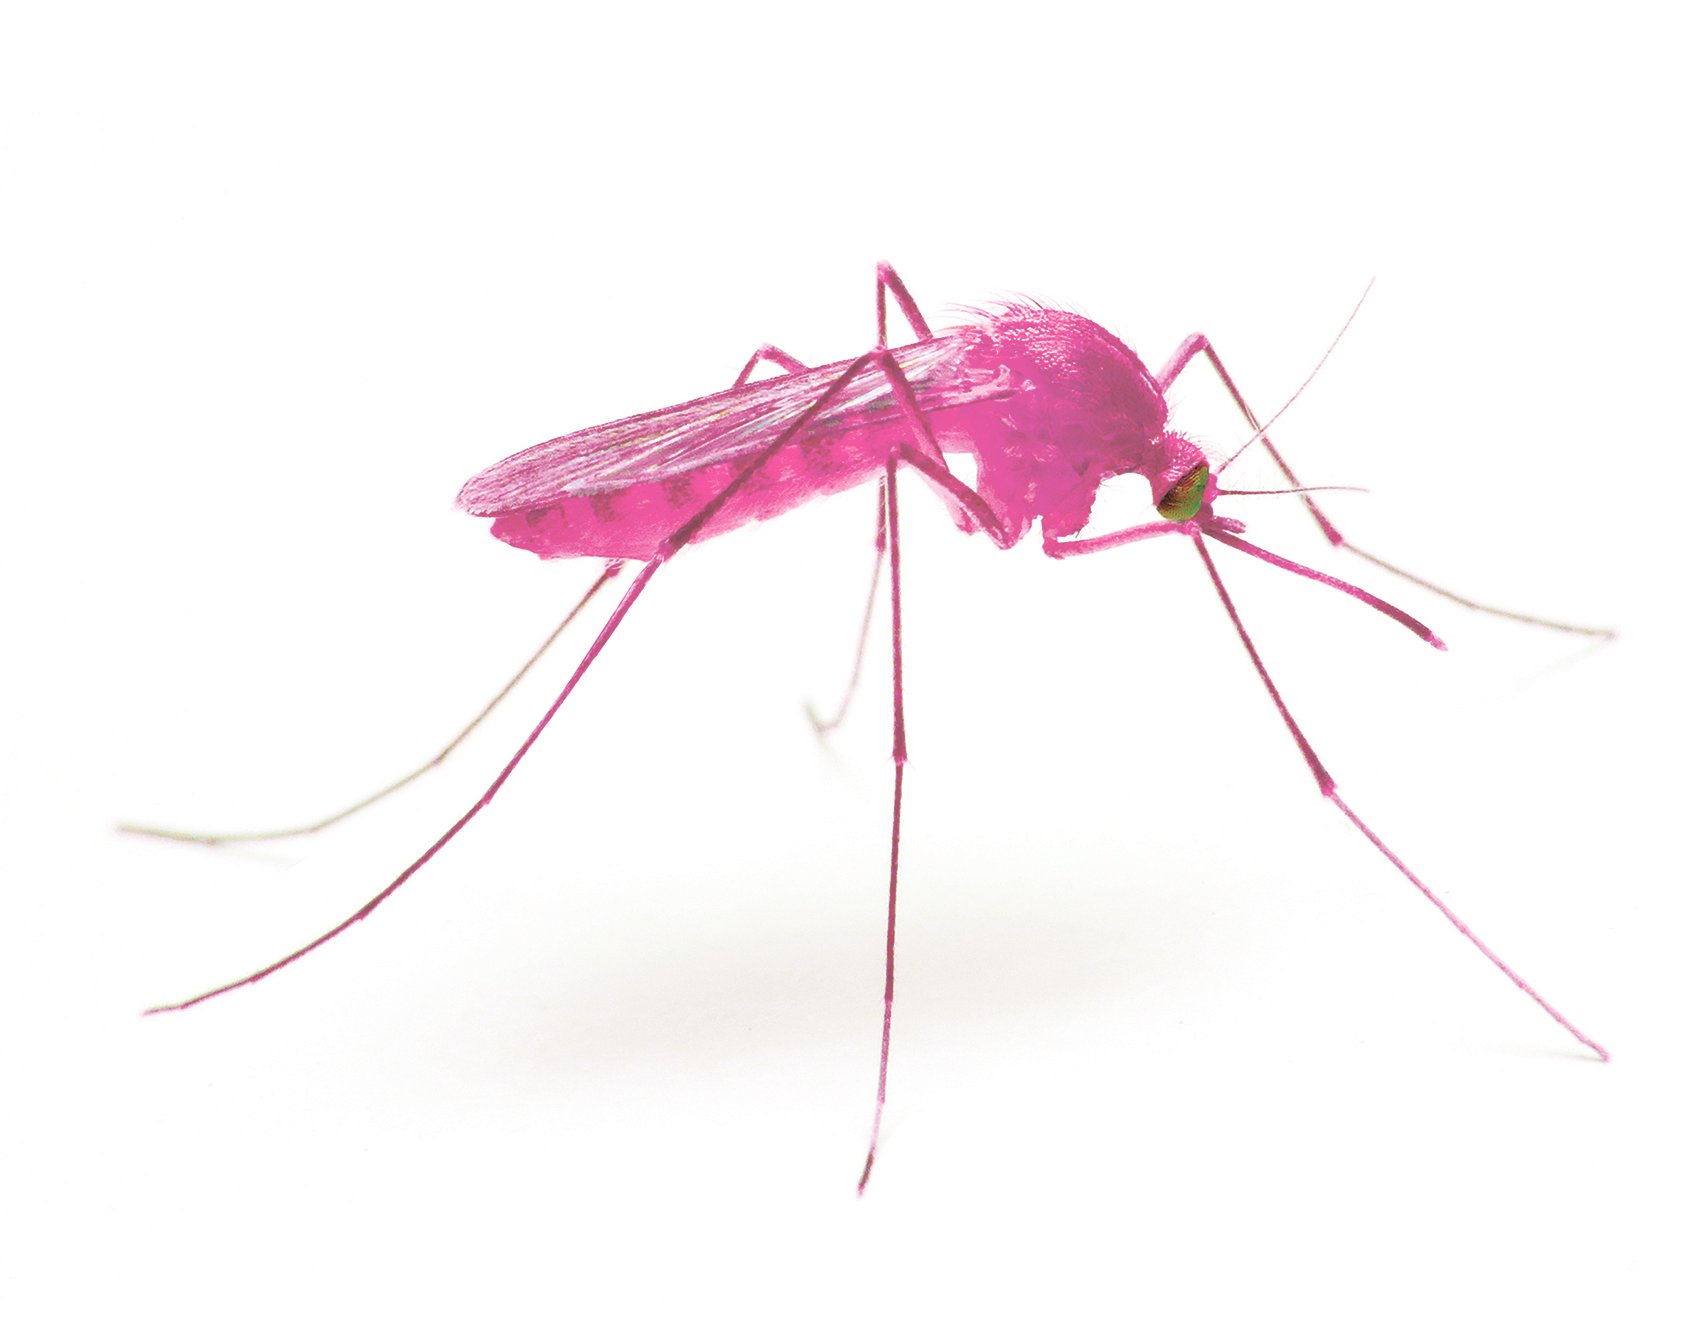 Flamingo Mosquito. Bitten, 2017. In 1979, there was a huge earthquake, as a result of which these strange insects appeared